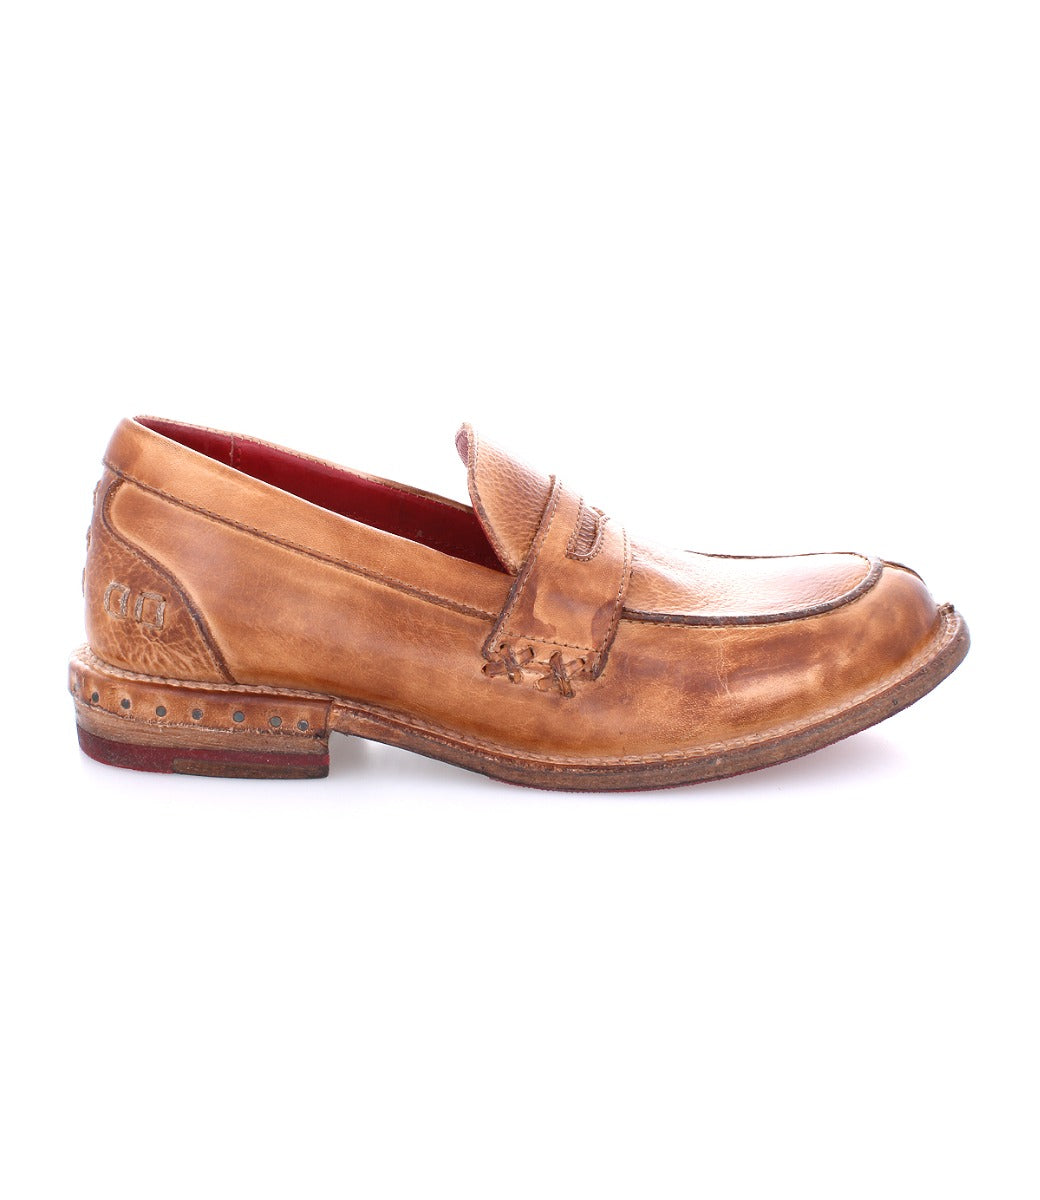 A Reina women's loafer in tan leather by Bed Stu.